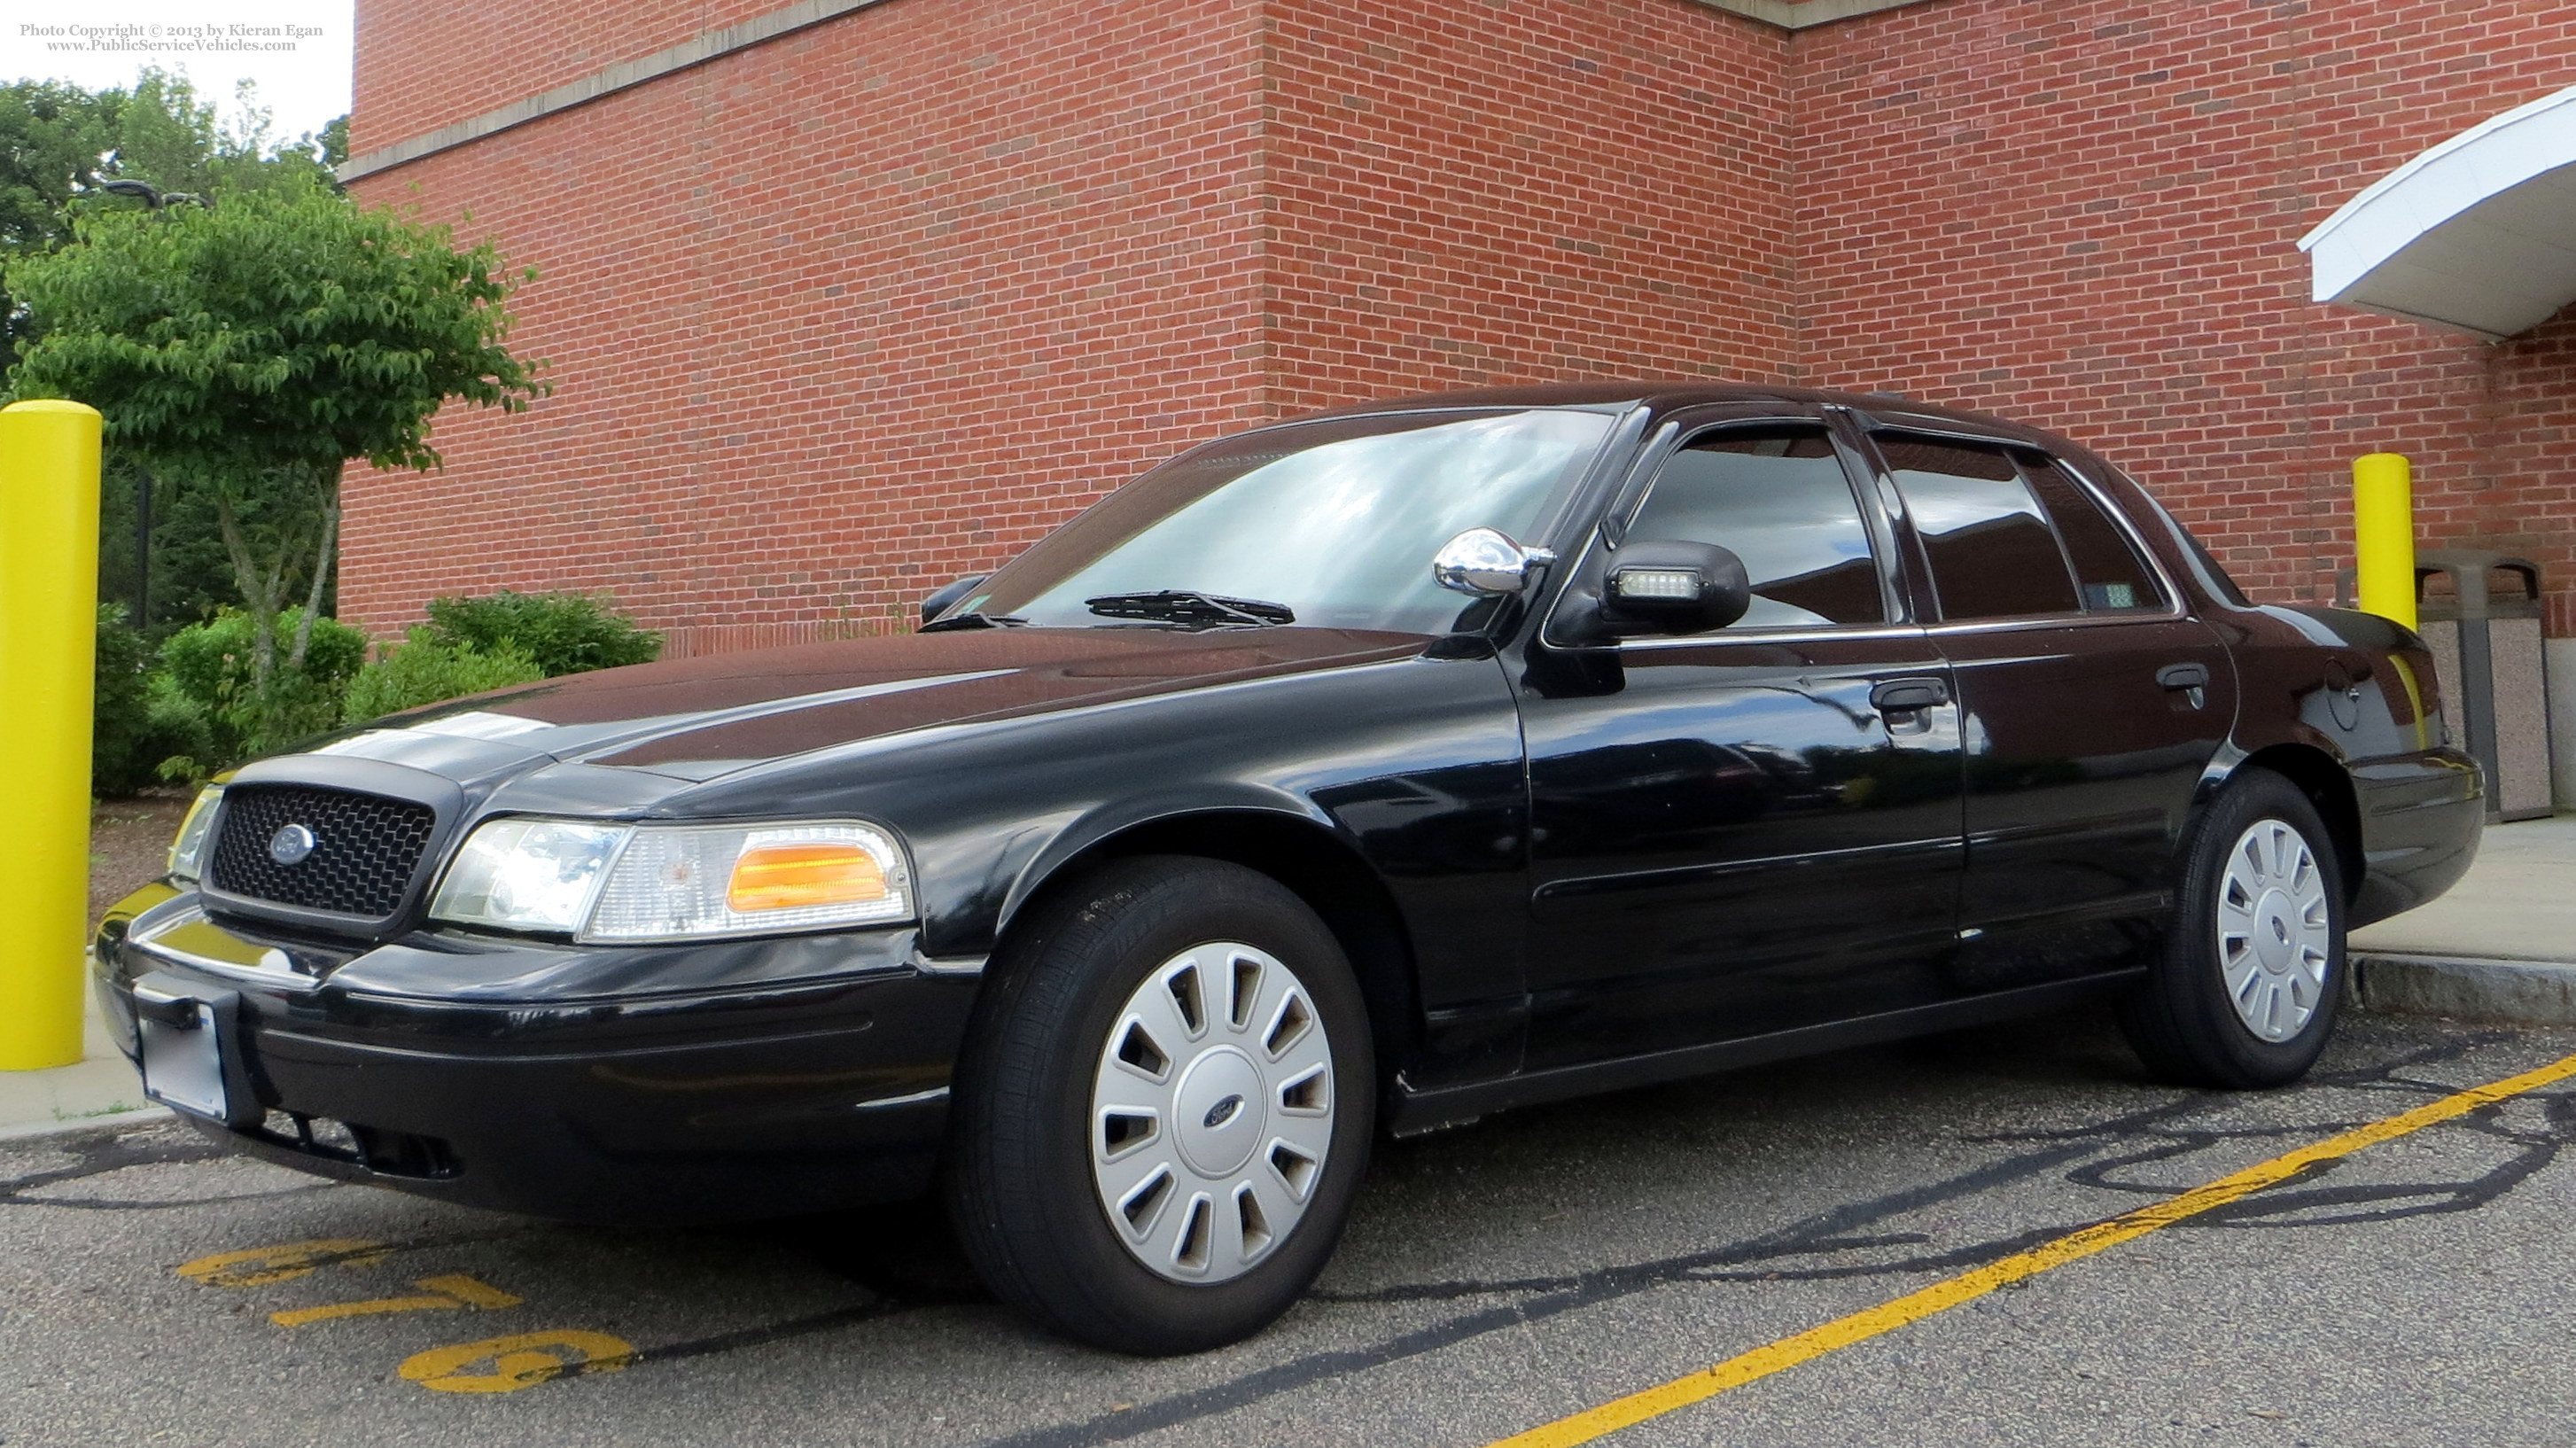 A photo  of Norwood Police
            Unmarked Unit, a 2006-2008 Ford Crown Victoria Police Interceptor             taken by Kieran Egan